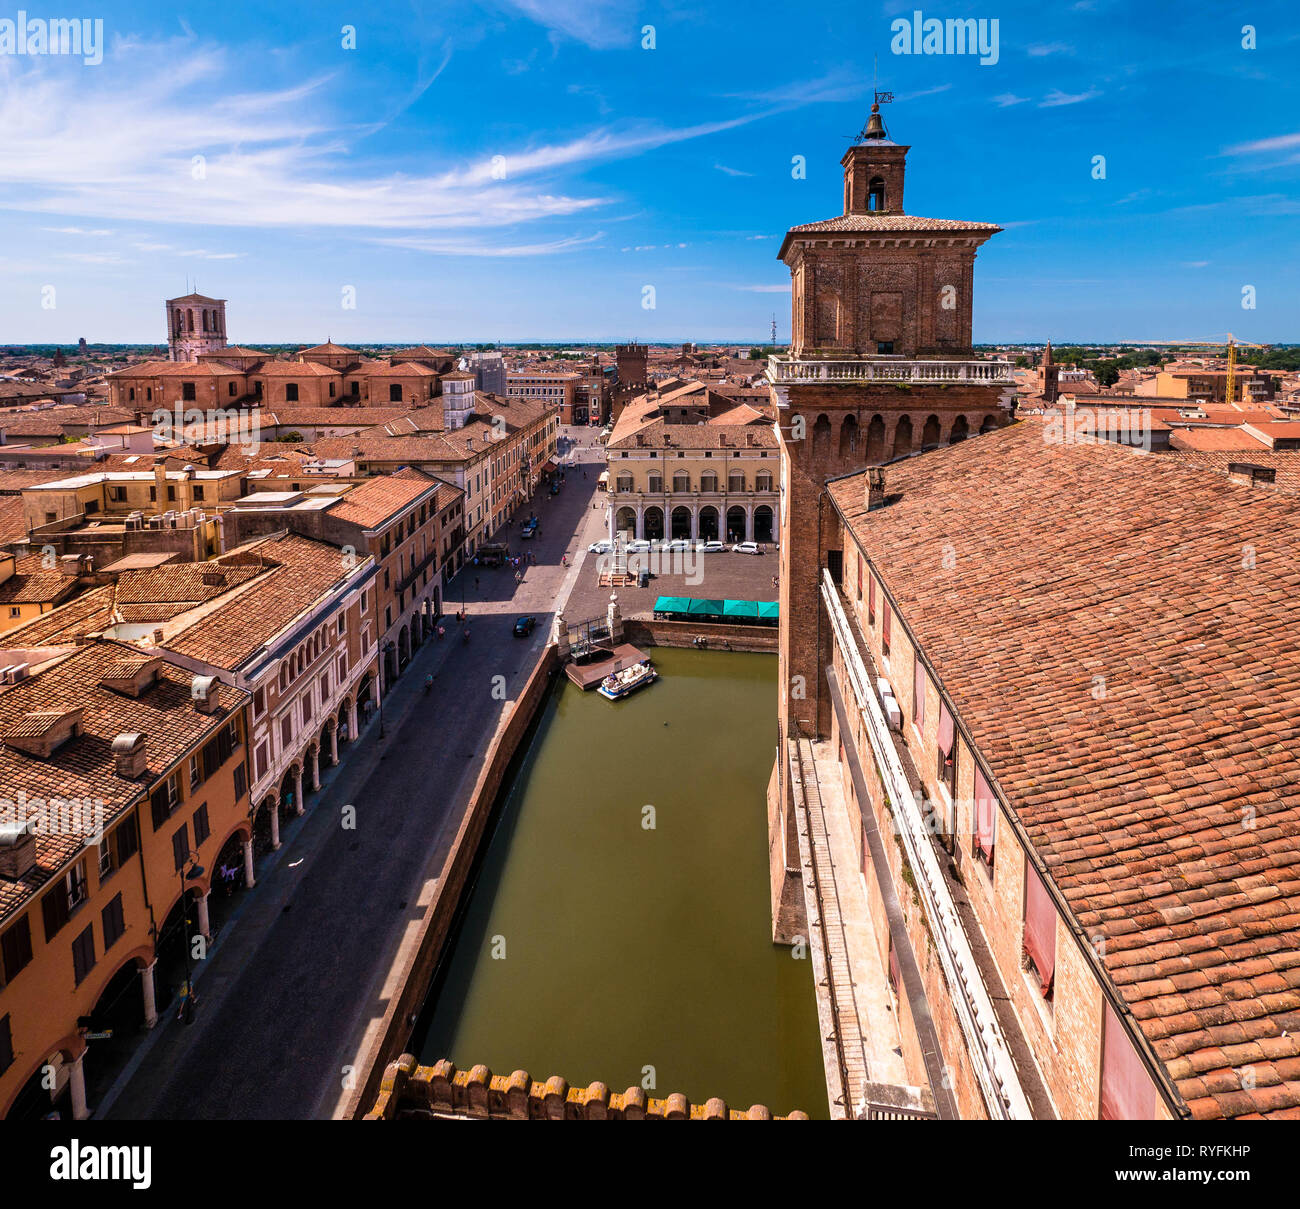 View from the Castello Estense over the green moat towards the Cathedral in Ferrara, Italy Stock Photo